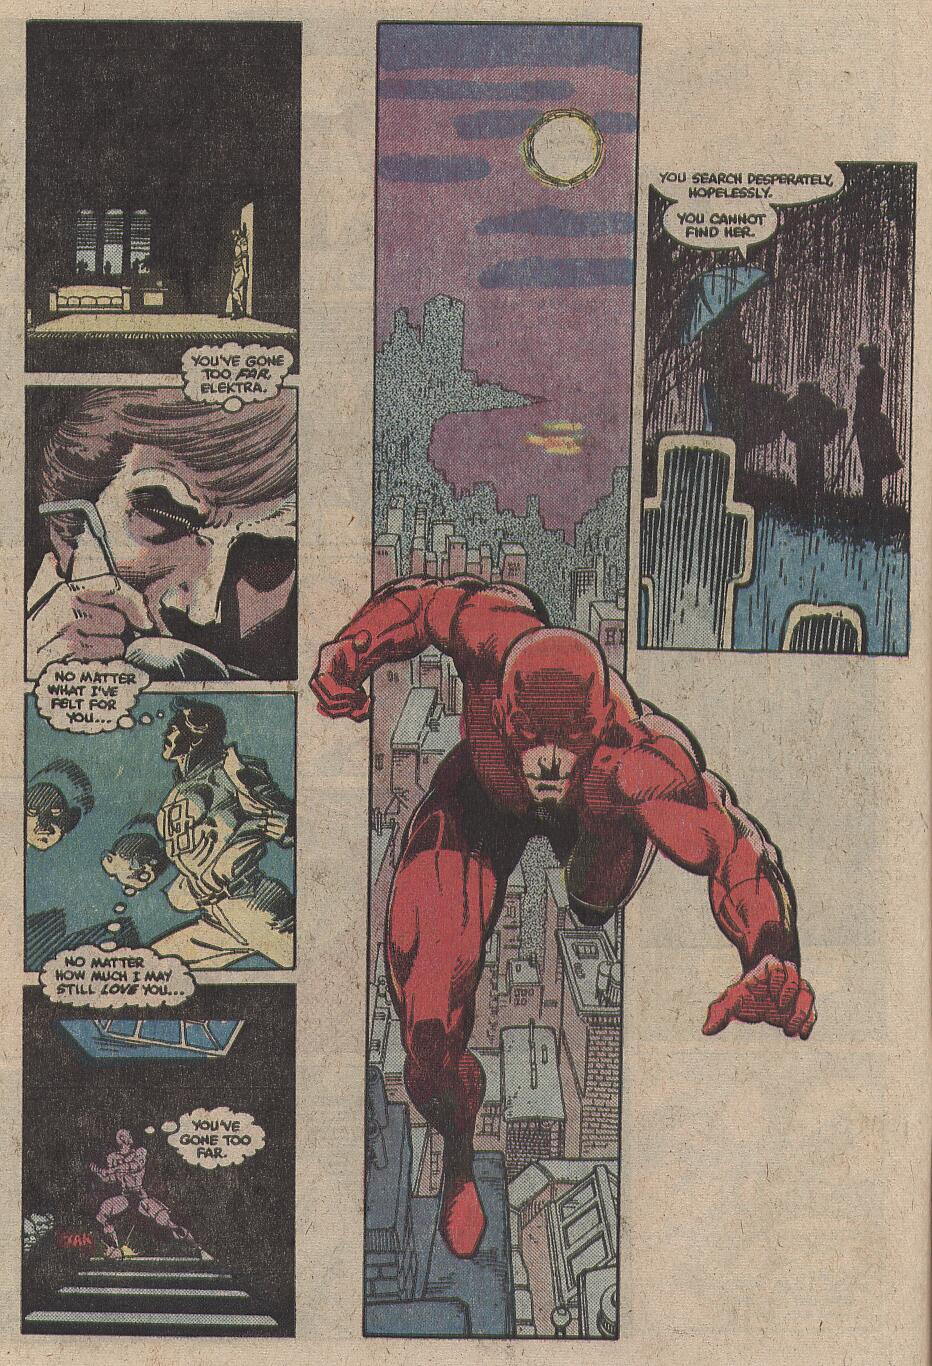 What If? (1977) issue 35 - Elektra had lived - Page 8